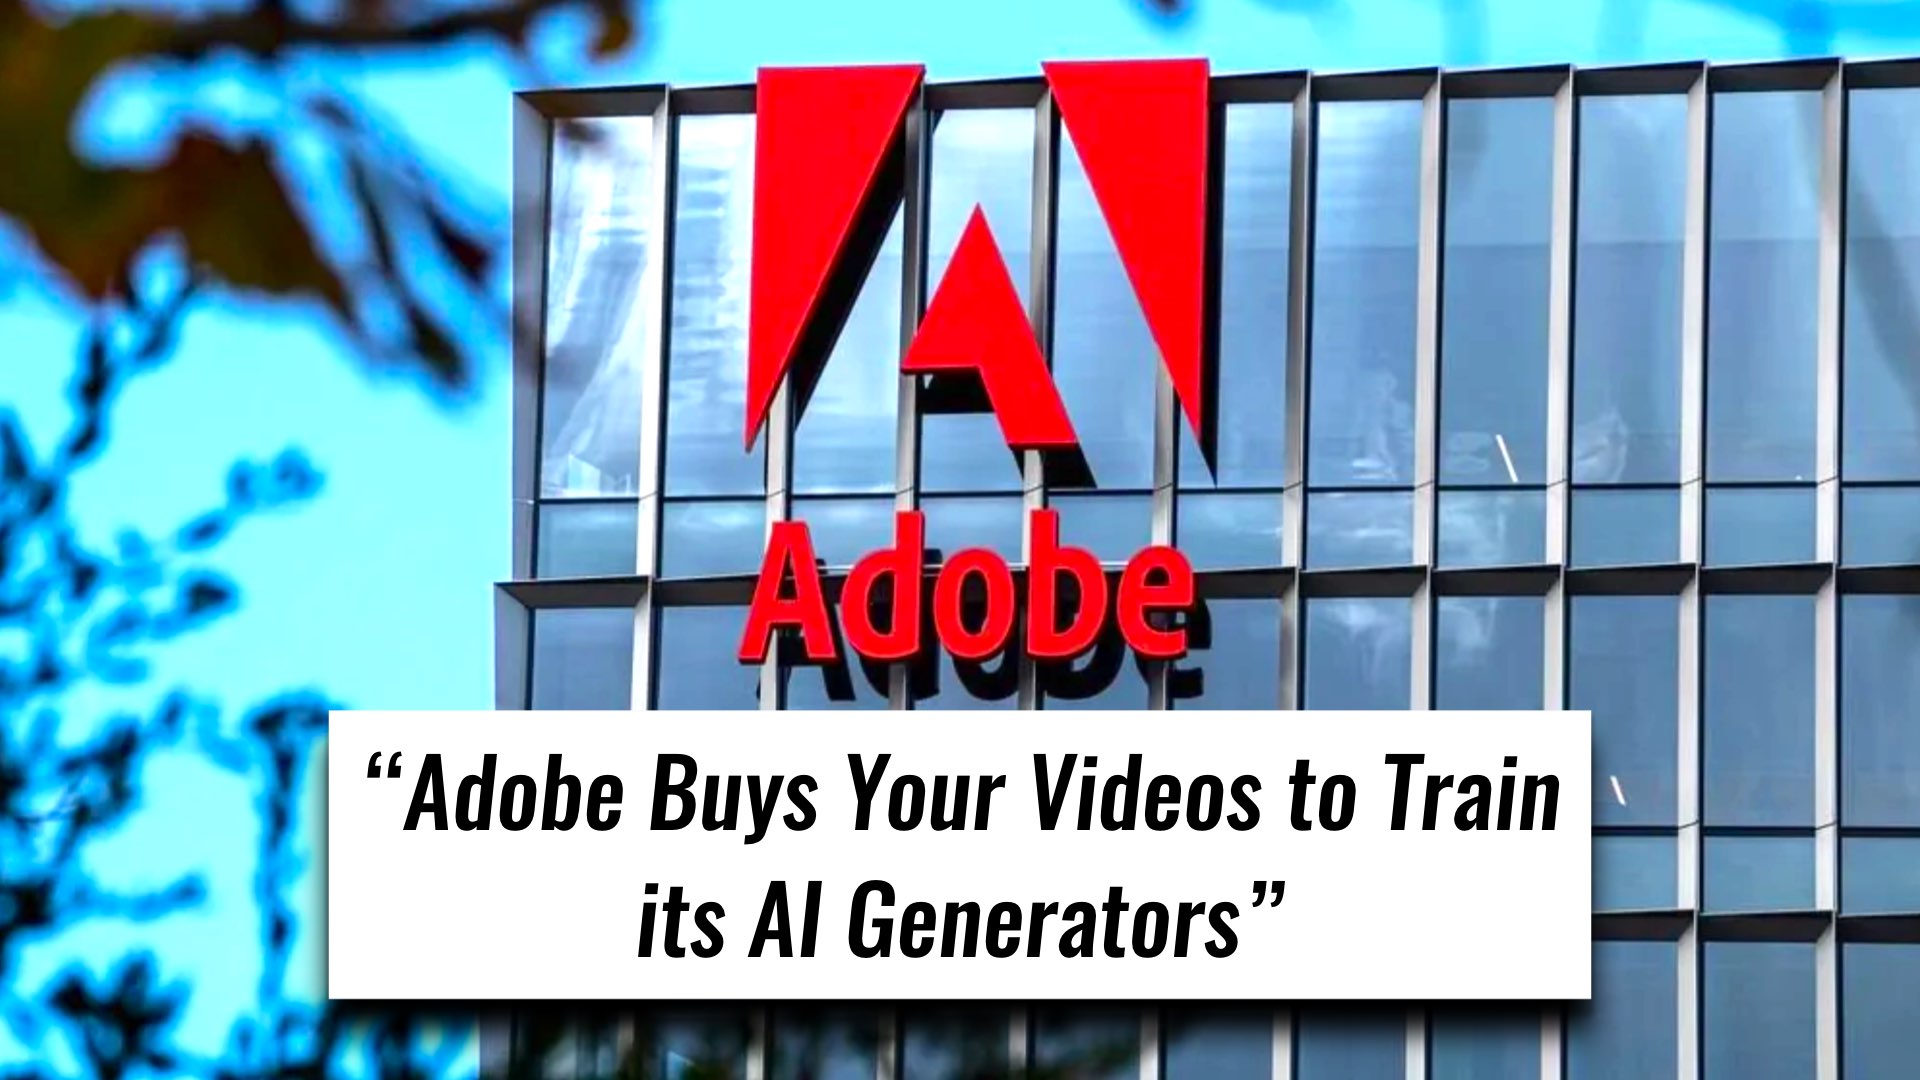 Adobe Buys Your Videos to Train its AI Generators for the Price of $3 Per Minute